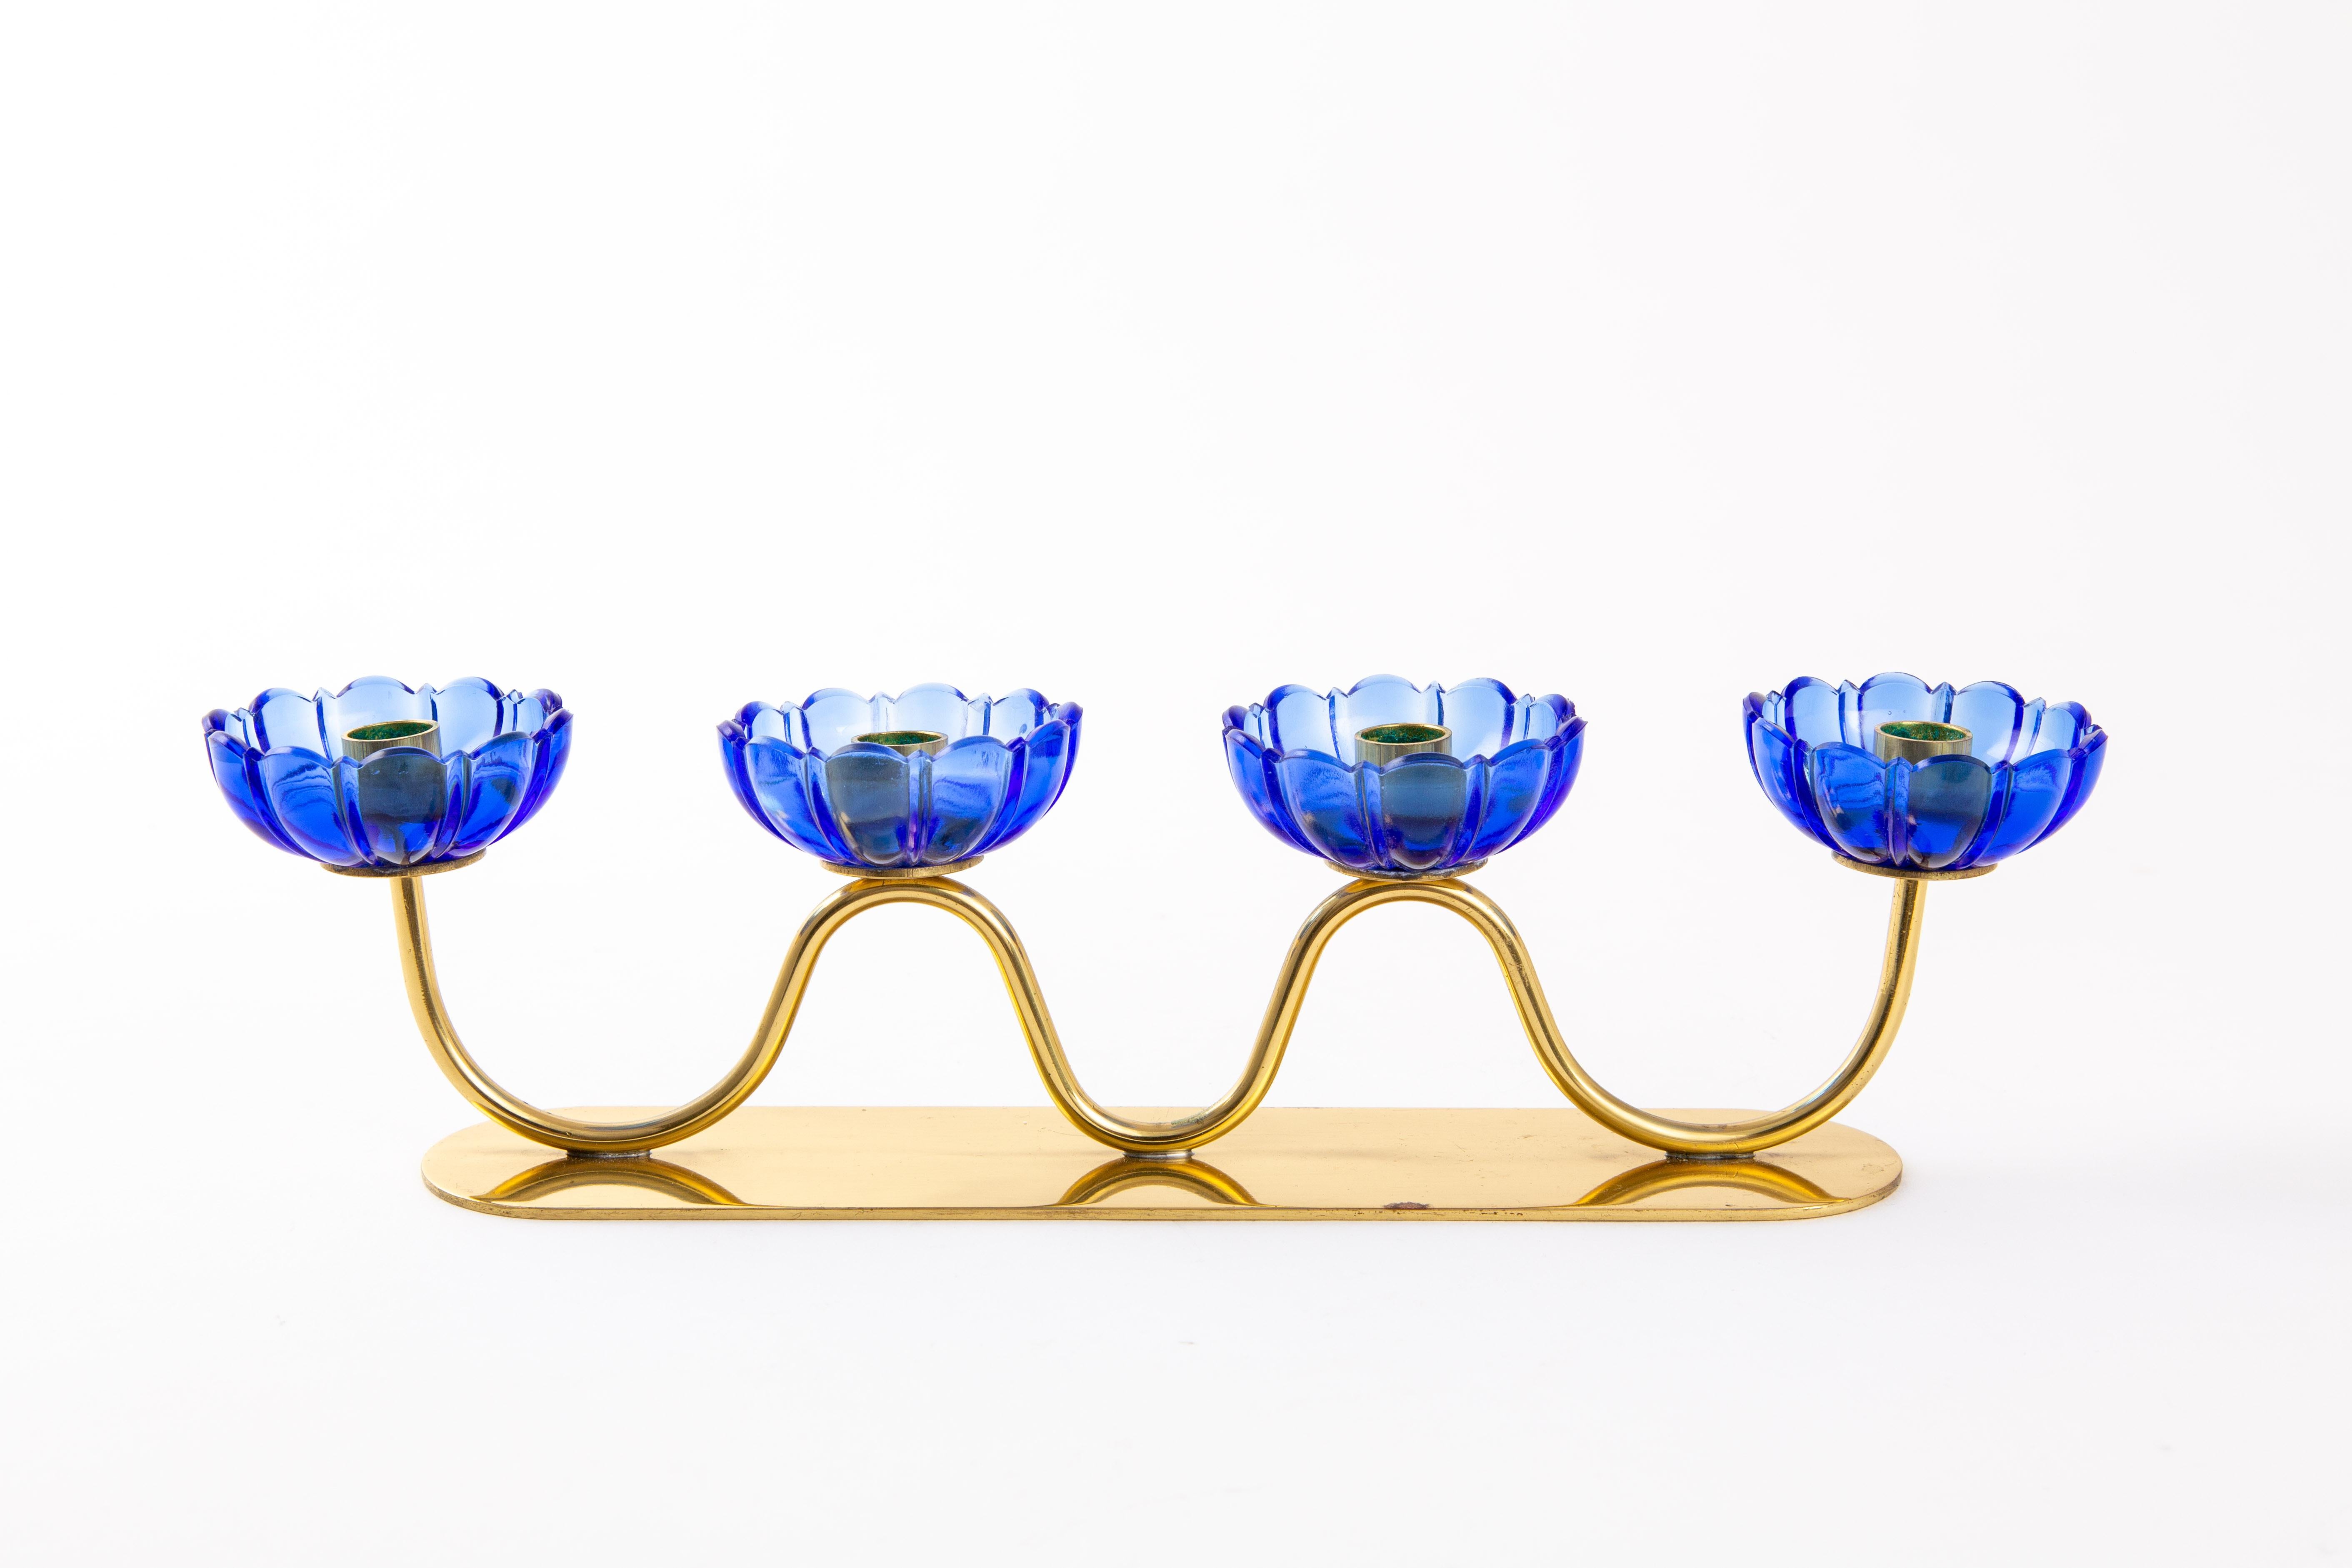 Gunnar Ander candleholder. A candleholder with blue transparent art glass. Designed by Gunnar Ander for Swedish Ystad-Metall. The candelabra marked on the bottom.